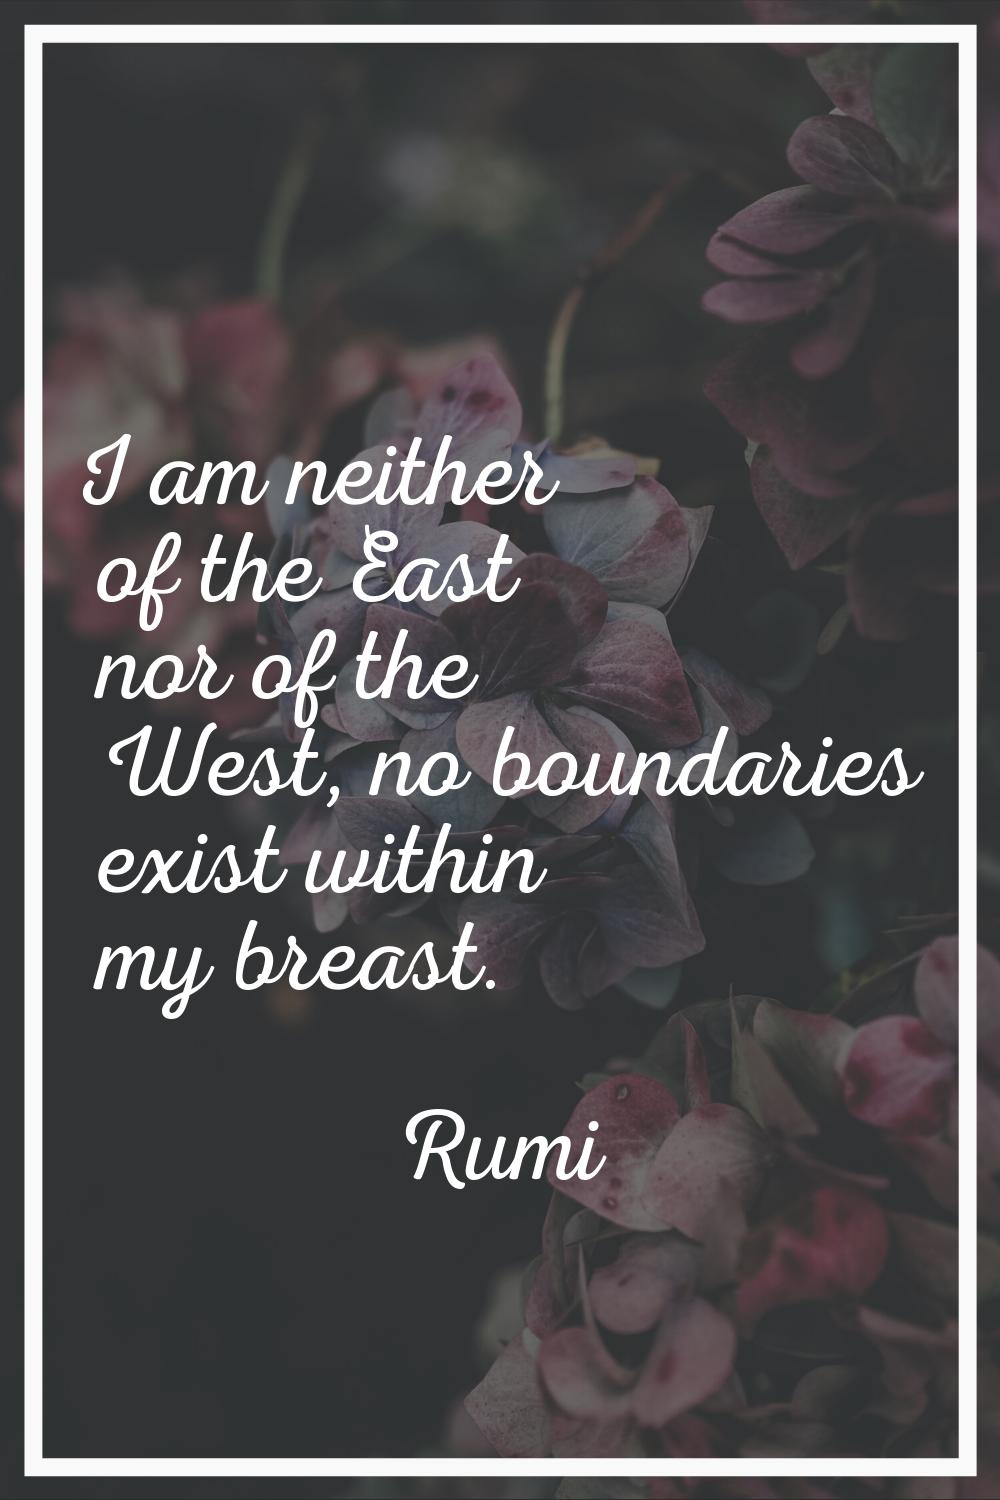 I am neither of the East nor of the West, no boundaries exist within my breast.